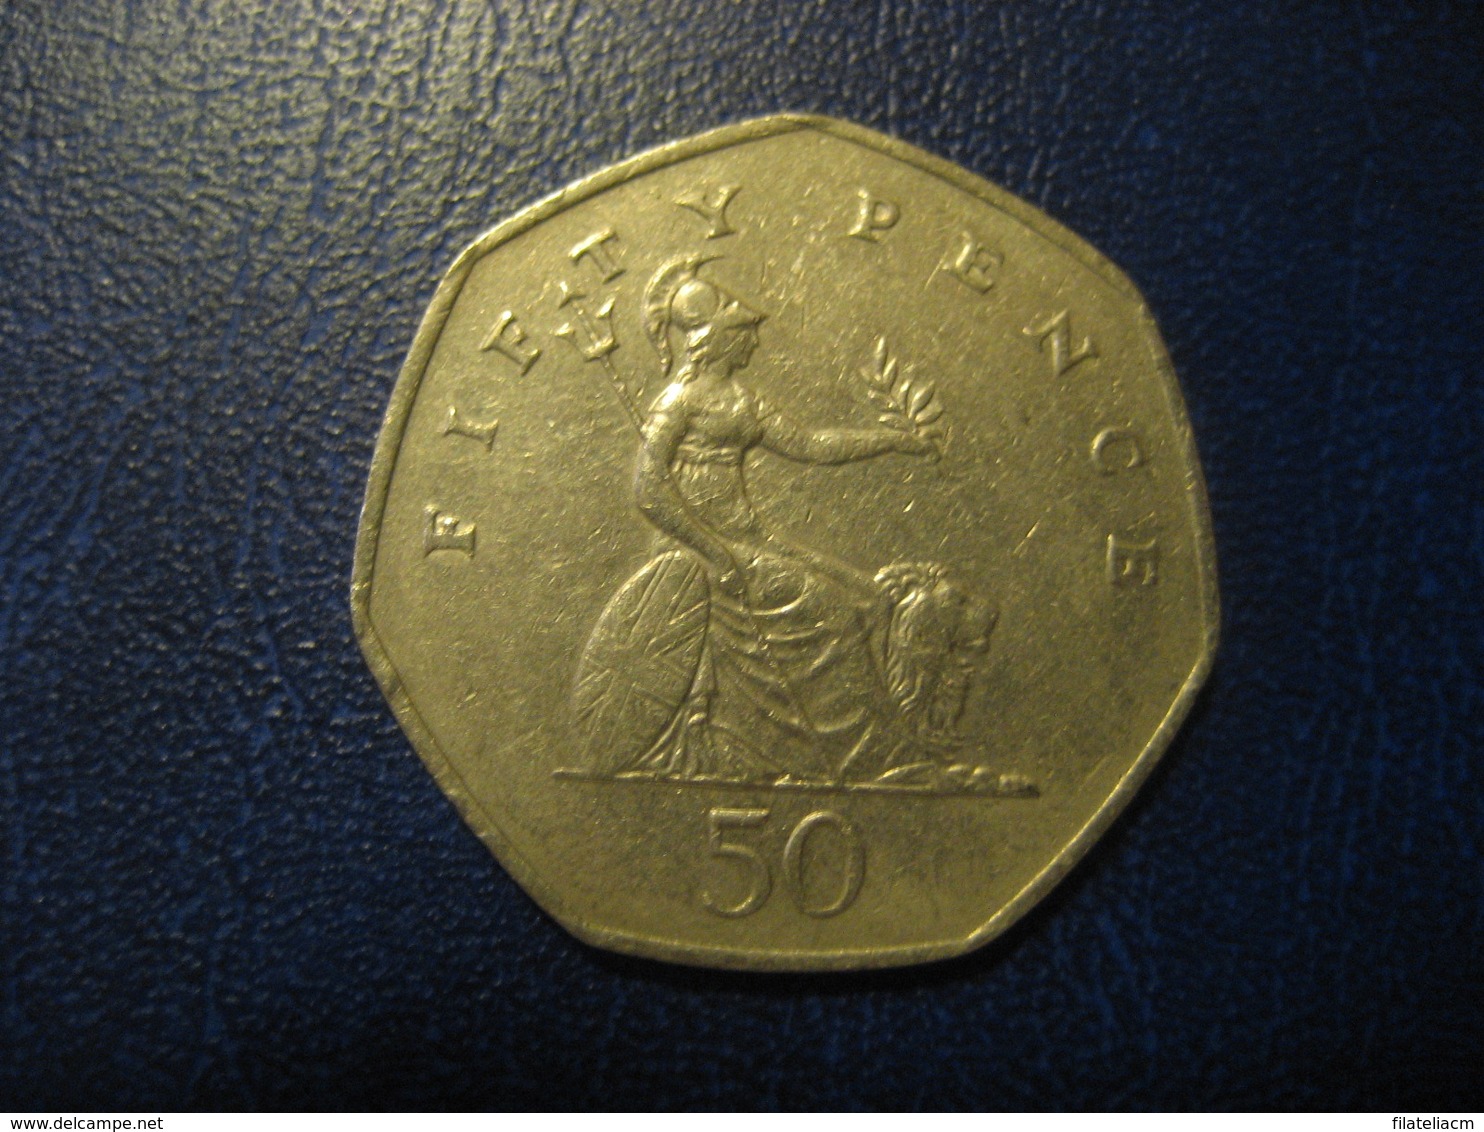 50 Pence 1997 ENGLAND Great Britain QE II Coin - 50 Pence